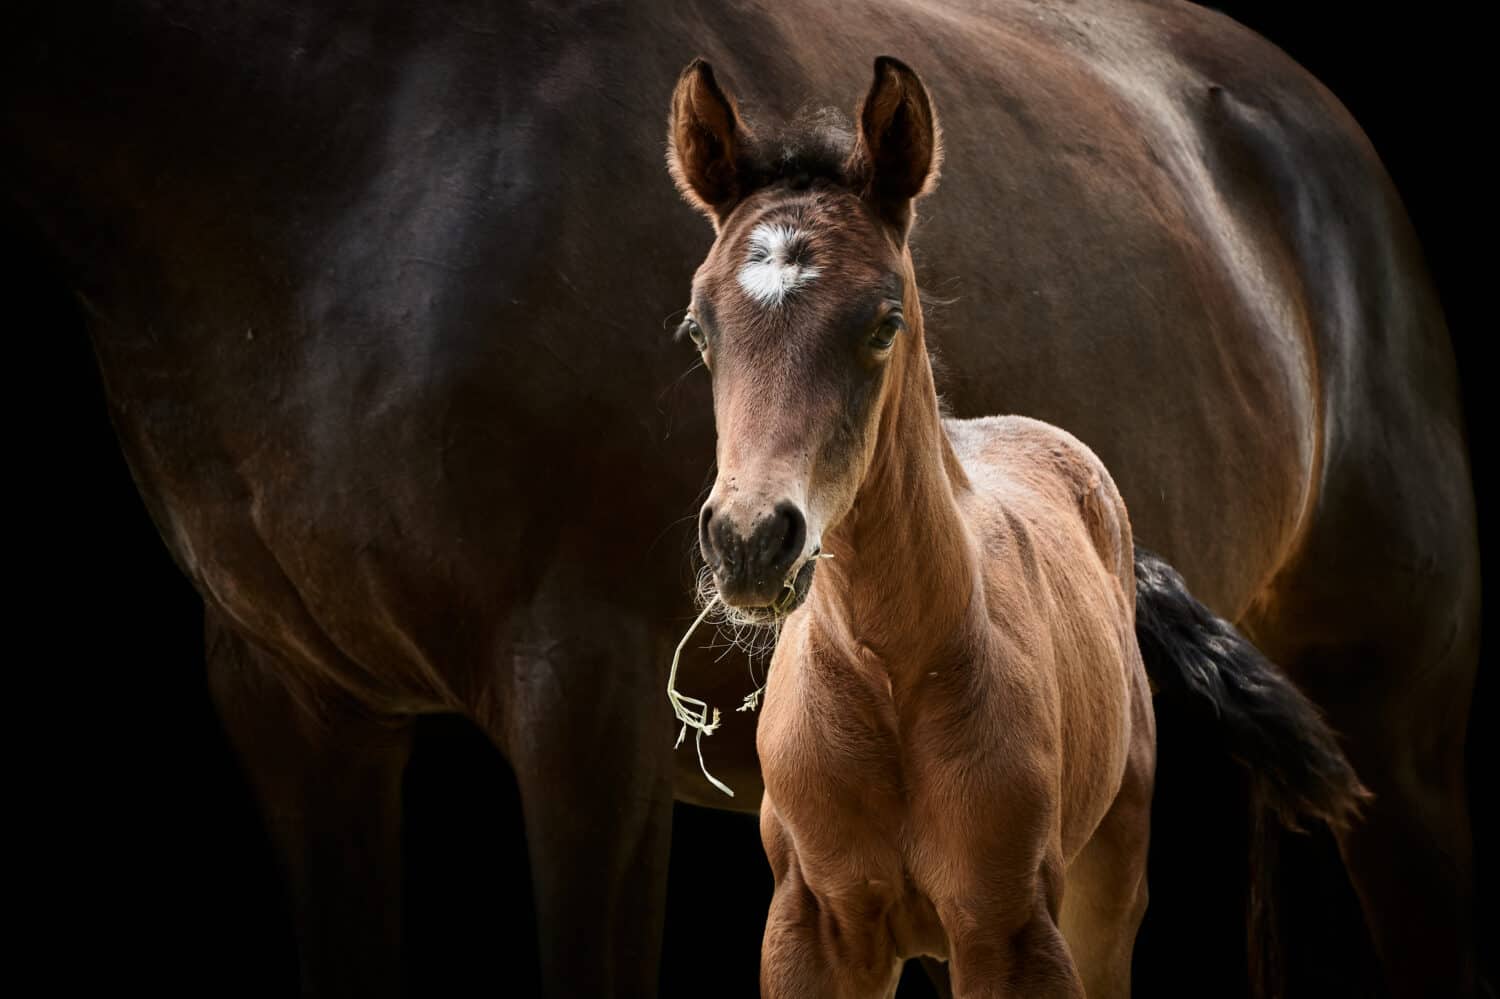 Brown filly foal standing close to mare. Animal mother and thoroughbred baby horse in beautiful light and isolated on black.